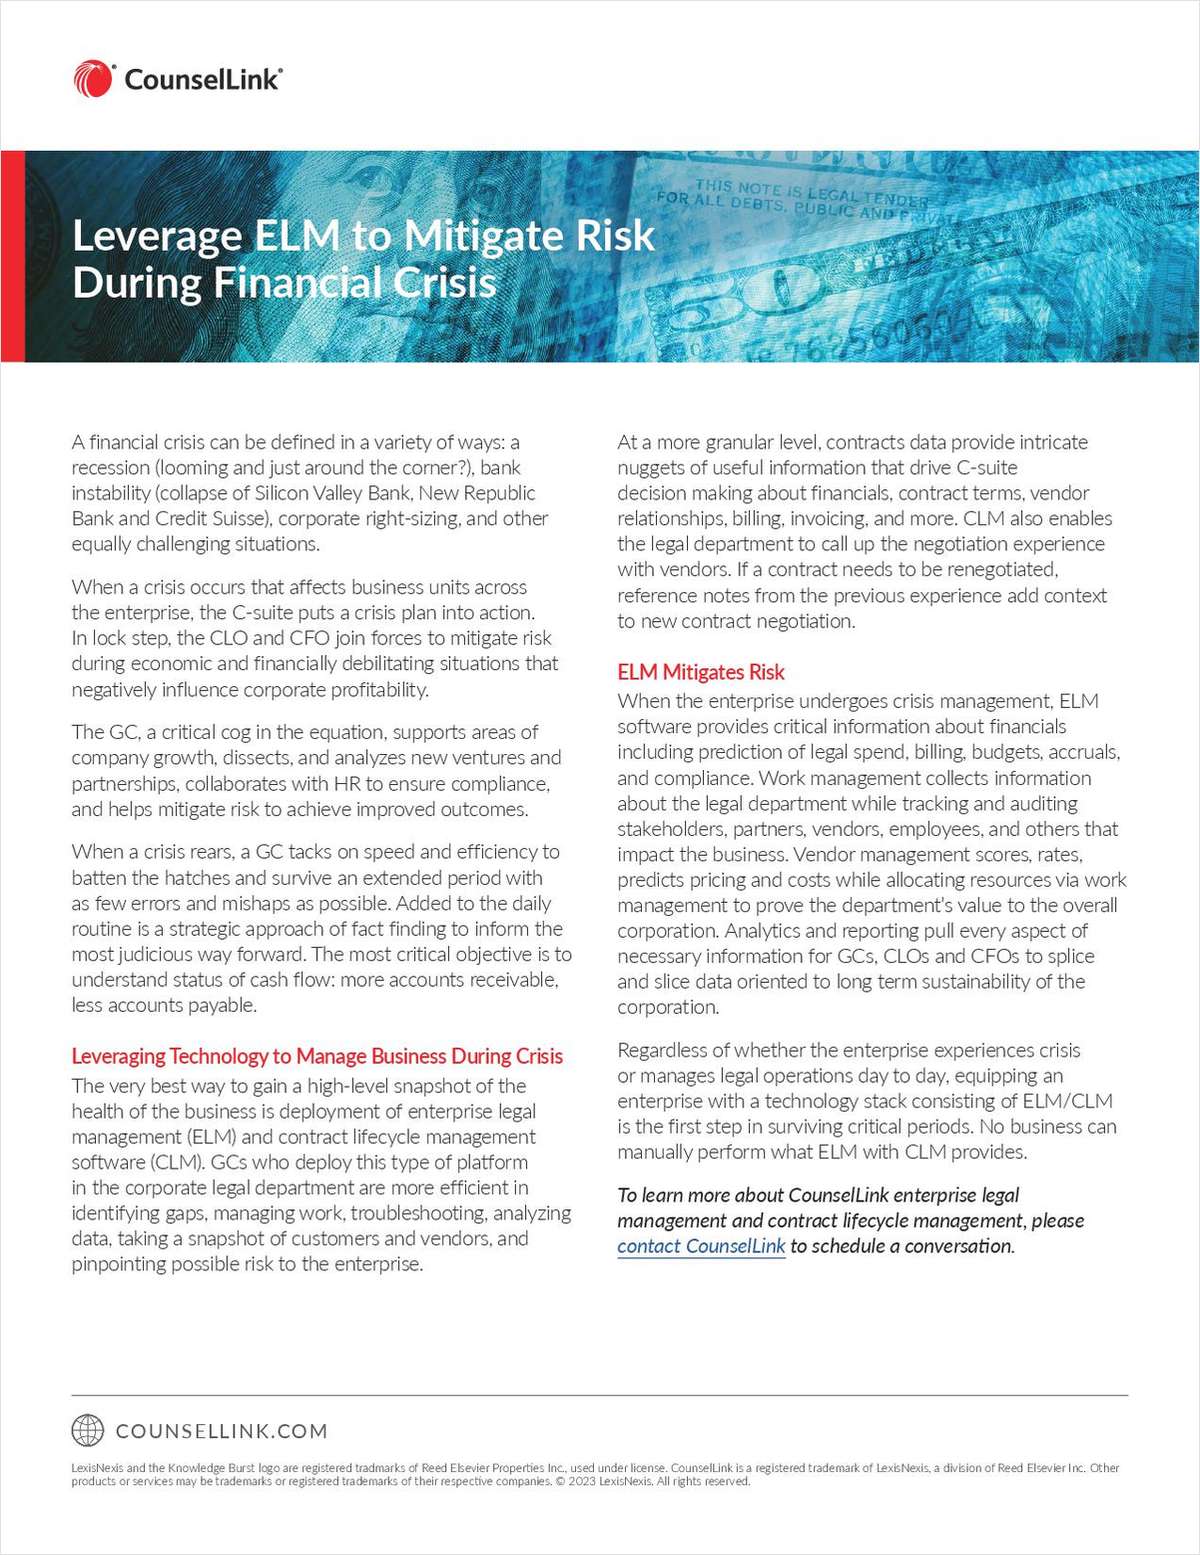 Whether your enterprise experiences a crisis, faces financial headwinds or manages legal operations day to day, download this white paper and discover how enterprise legal management (ELM) and contract lifecycle management (CLM) work in lockstep to mitigate risk and provide a snapshot of business health.